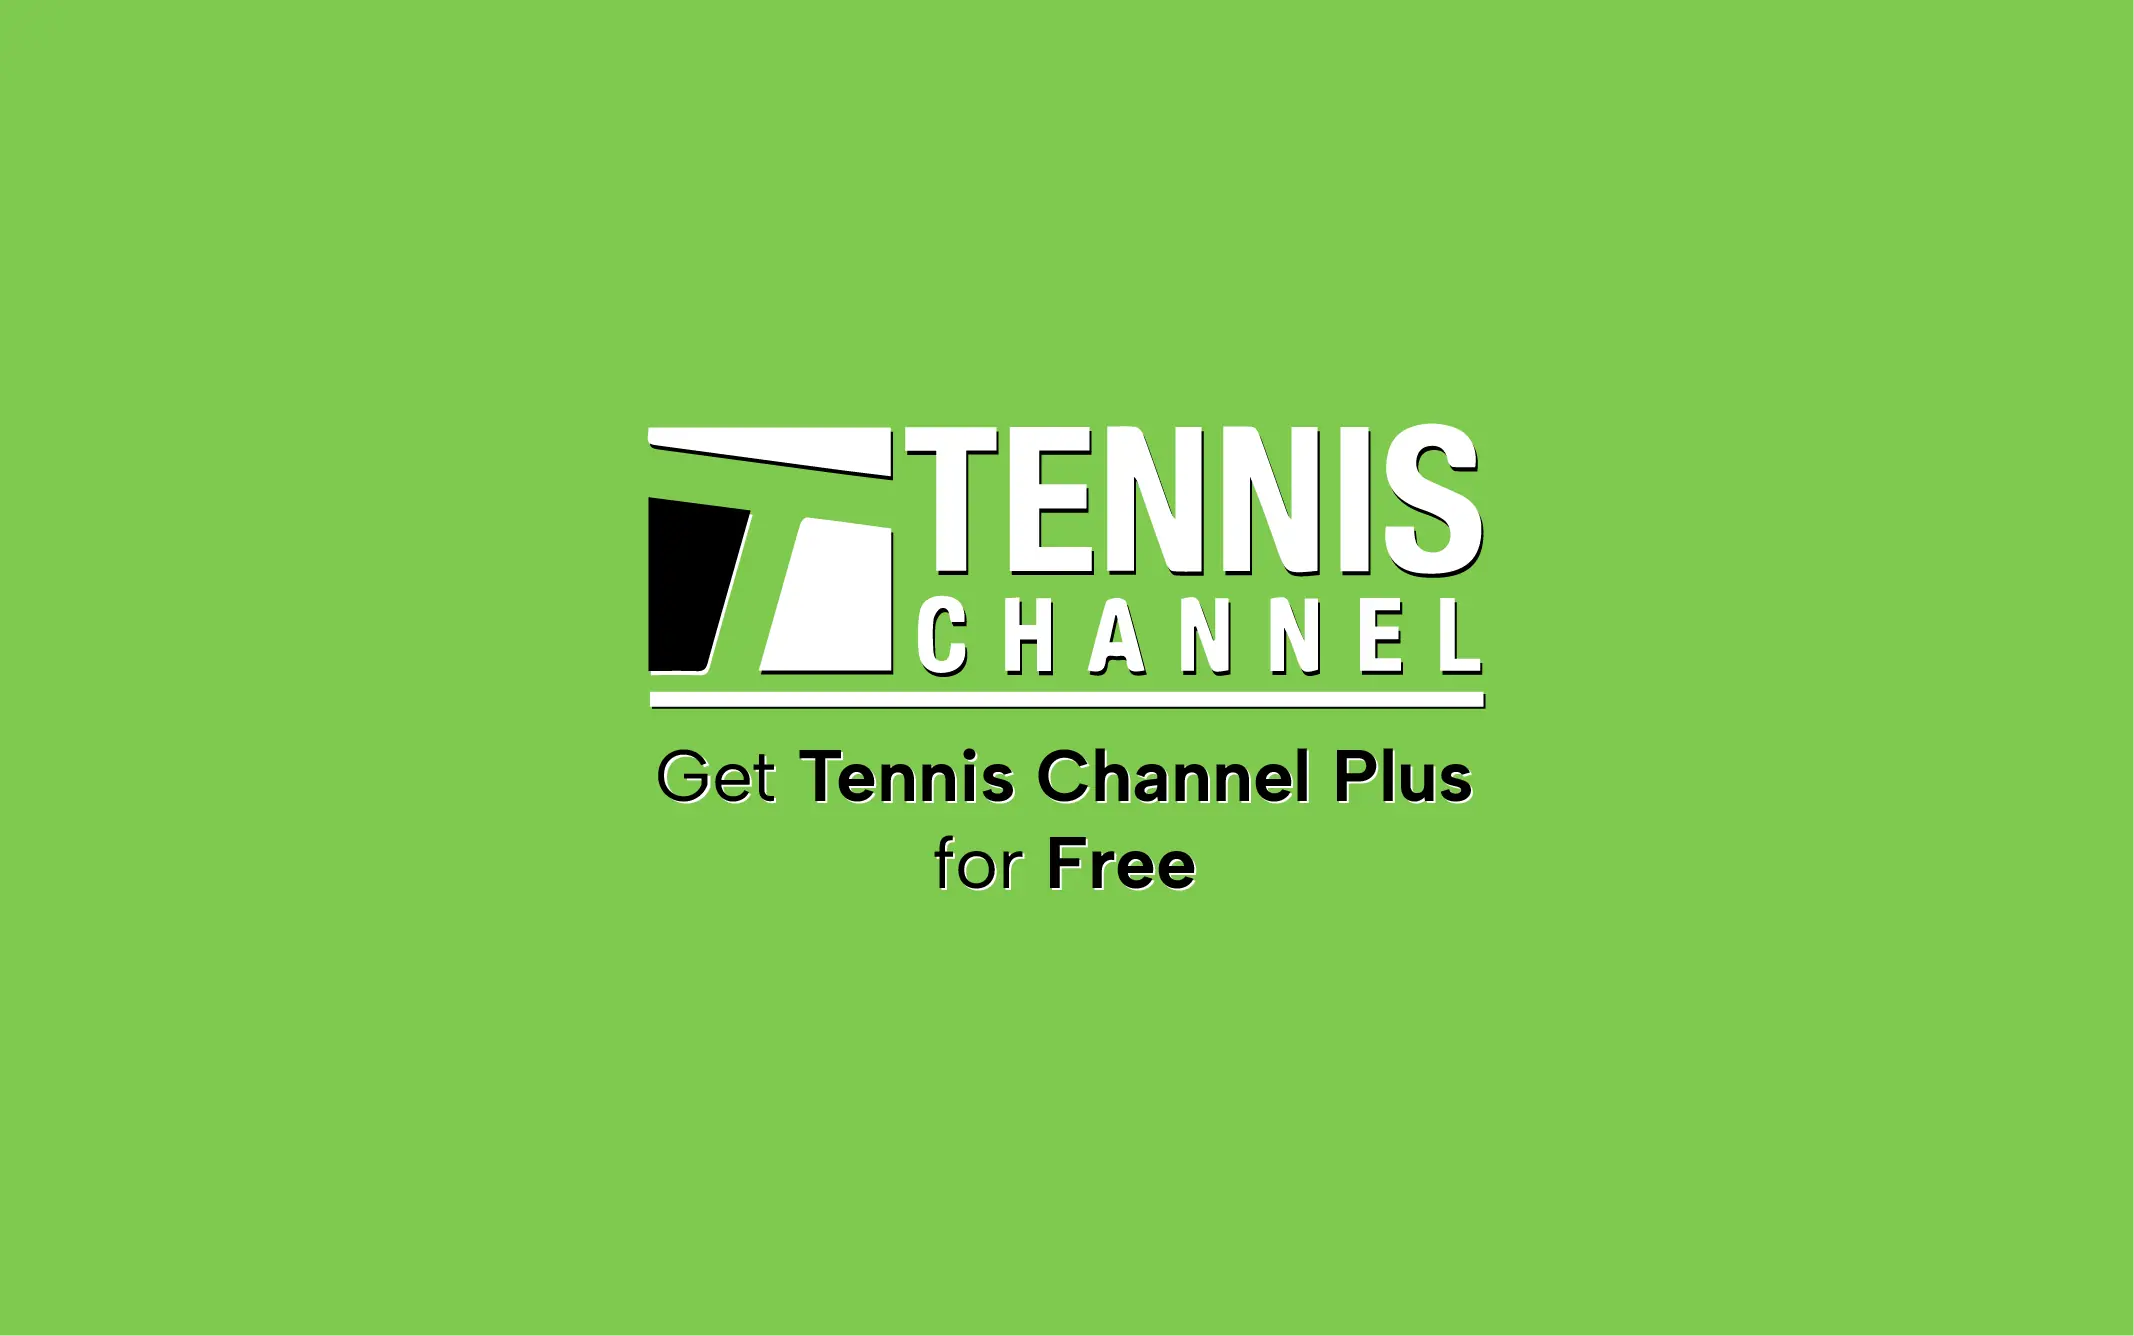 tennis channel plus coupon code 2022